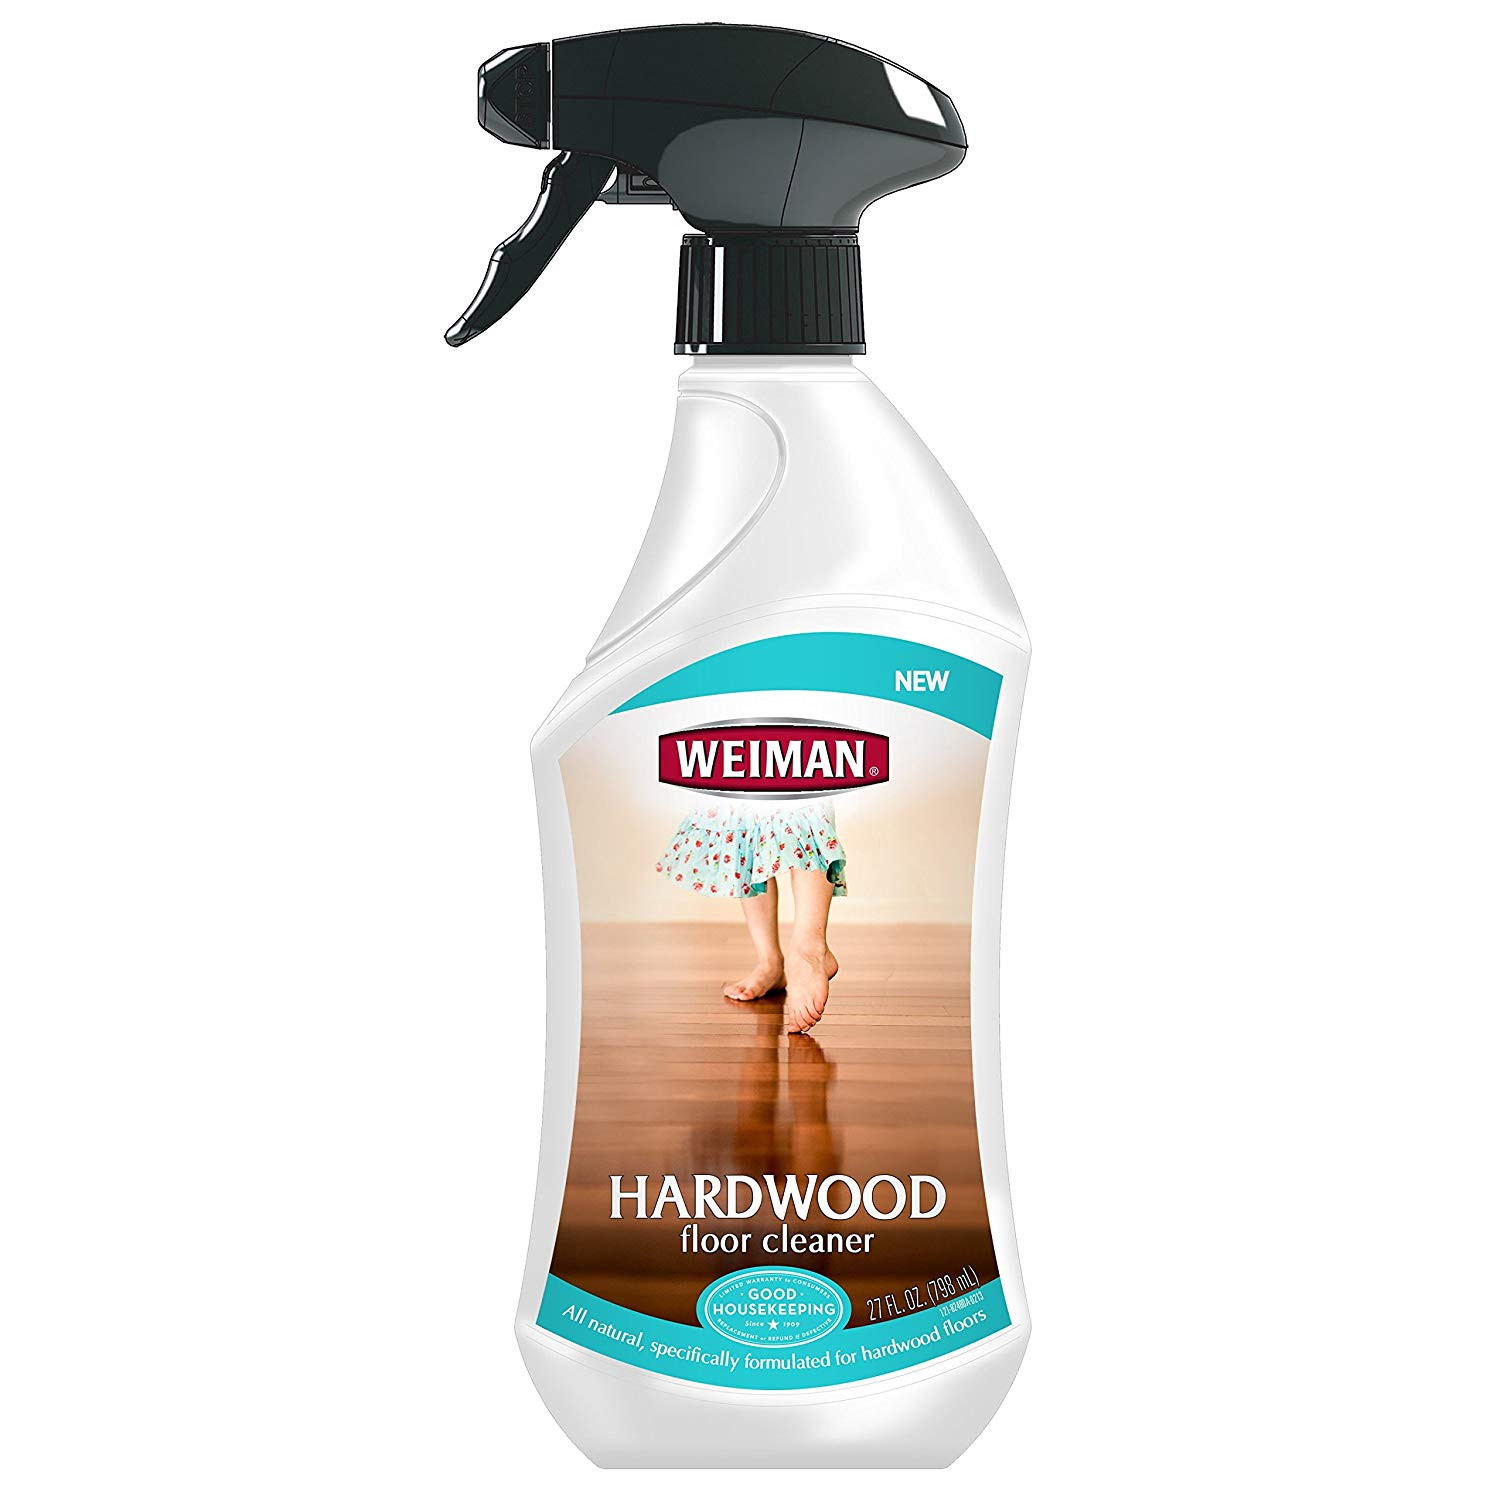 above all hardwood floors of amazon com weiman hardwood floor cleaner surface safe no harsh for amazon com weiman hardwood floor cleaner surface safe no harsh scent safe for use around kids and pets residue free 27 oz trigger home kitchen